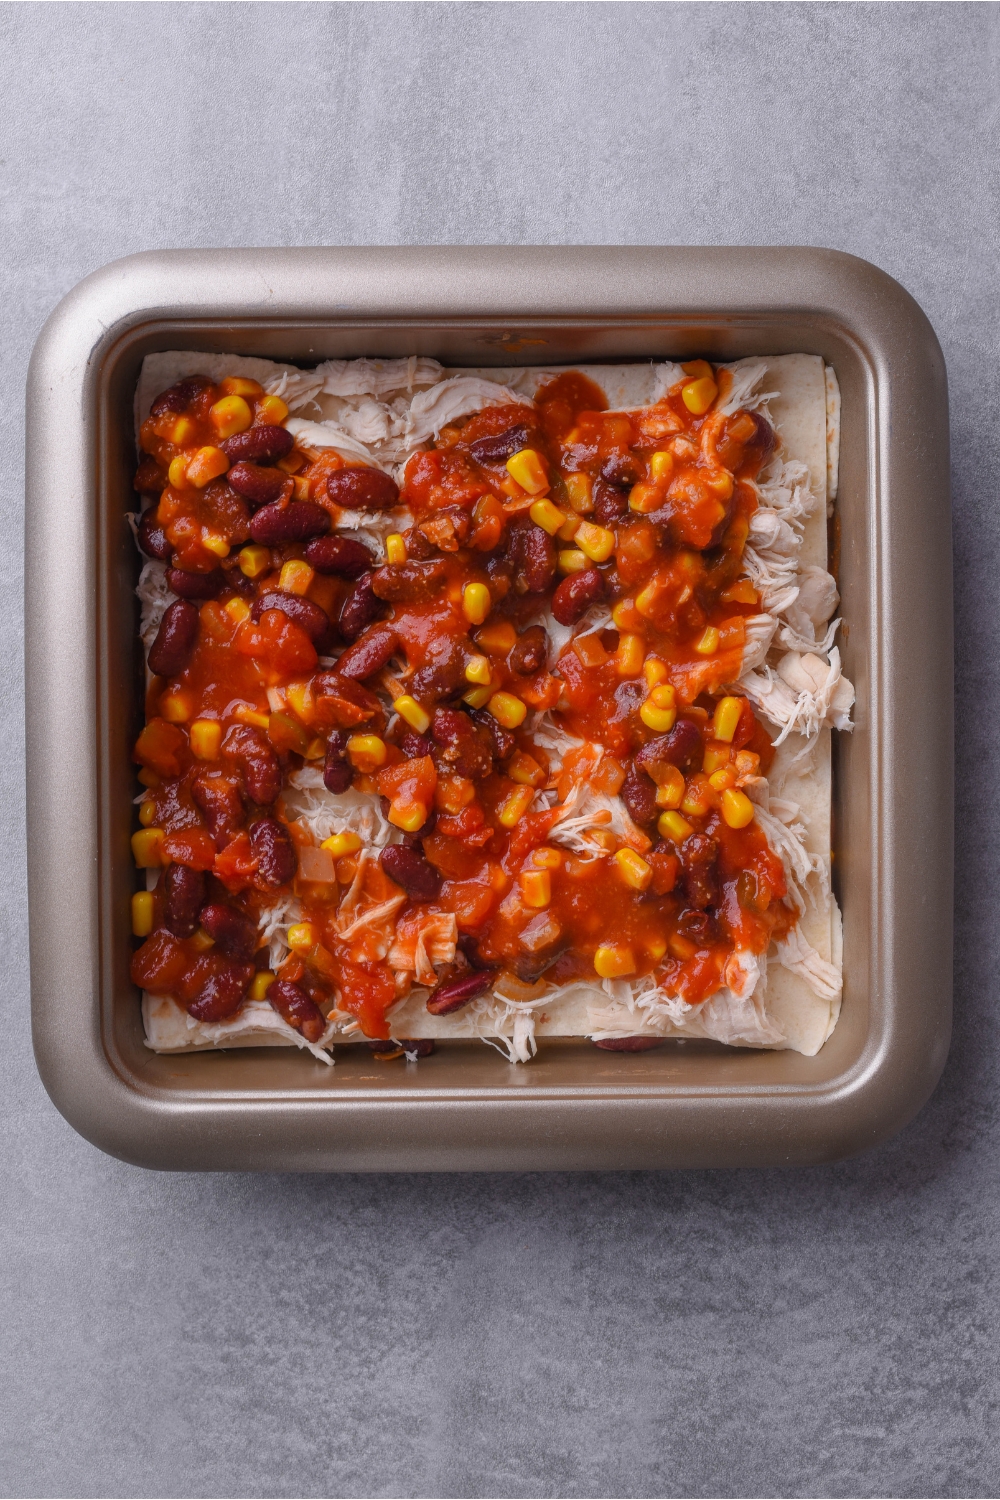 Square baking dish filled with layers of halved flour tortillas, shredded chicken, and a bean, corn, and tomato sauce mixture.